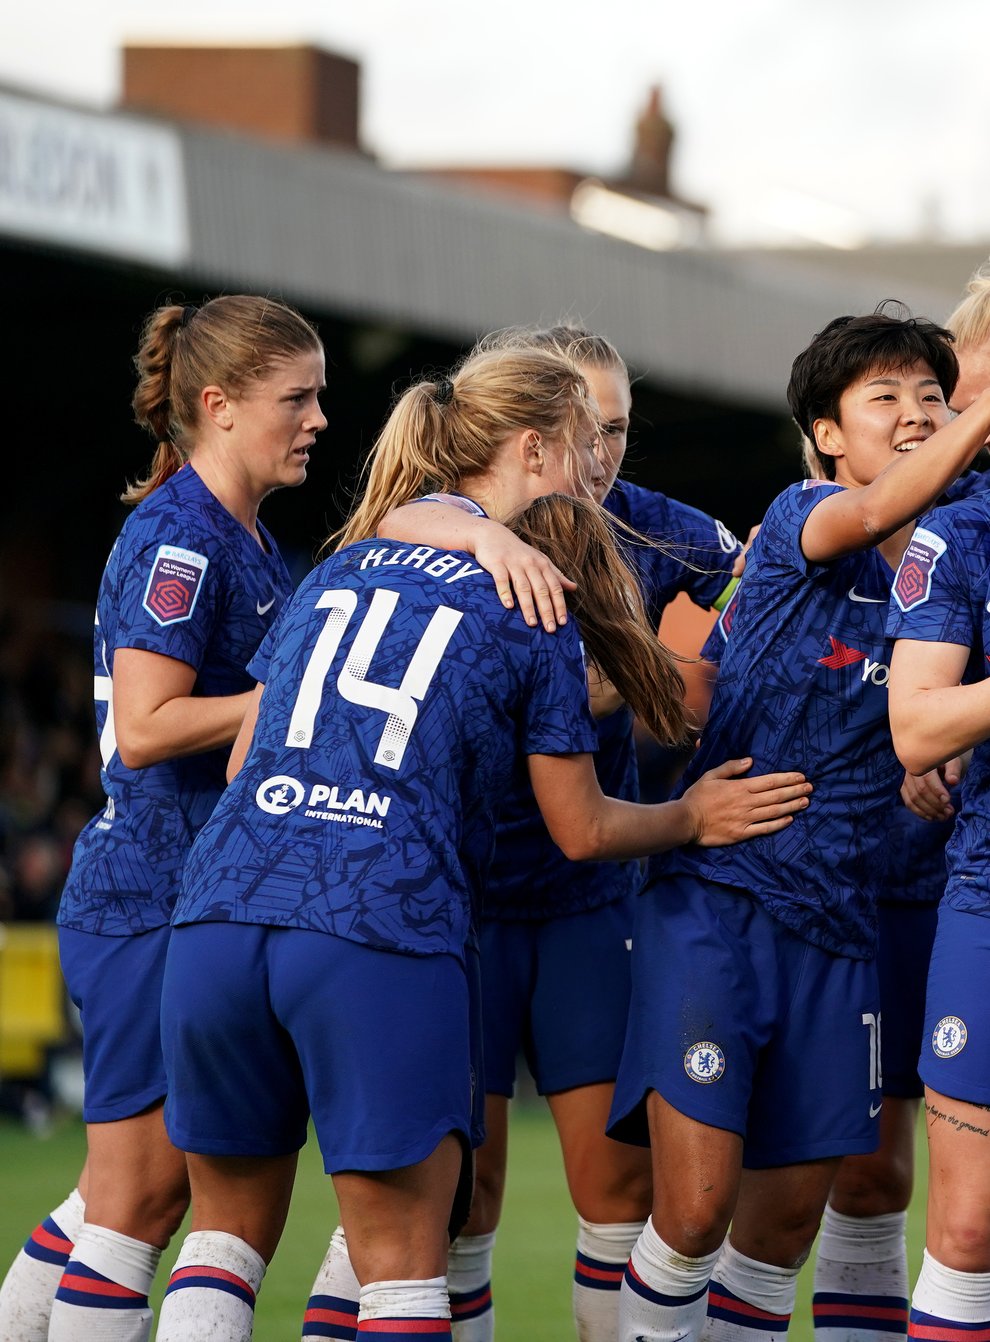 The Women's Super League was ended prematurely with Chelsea awarded the title on a points per game basis